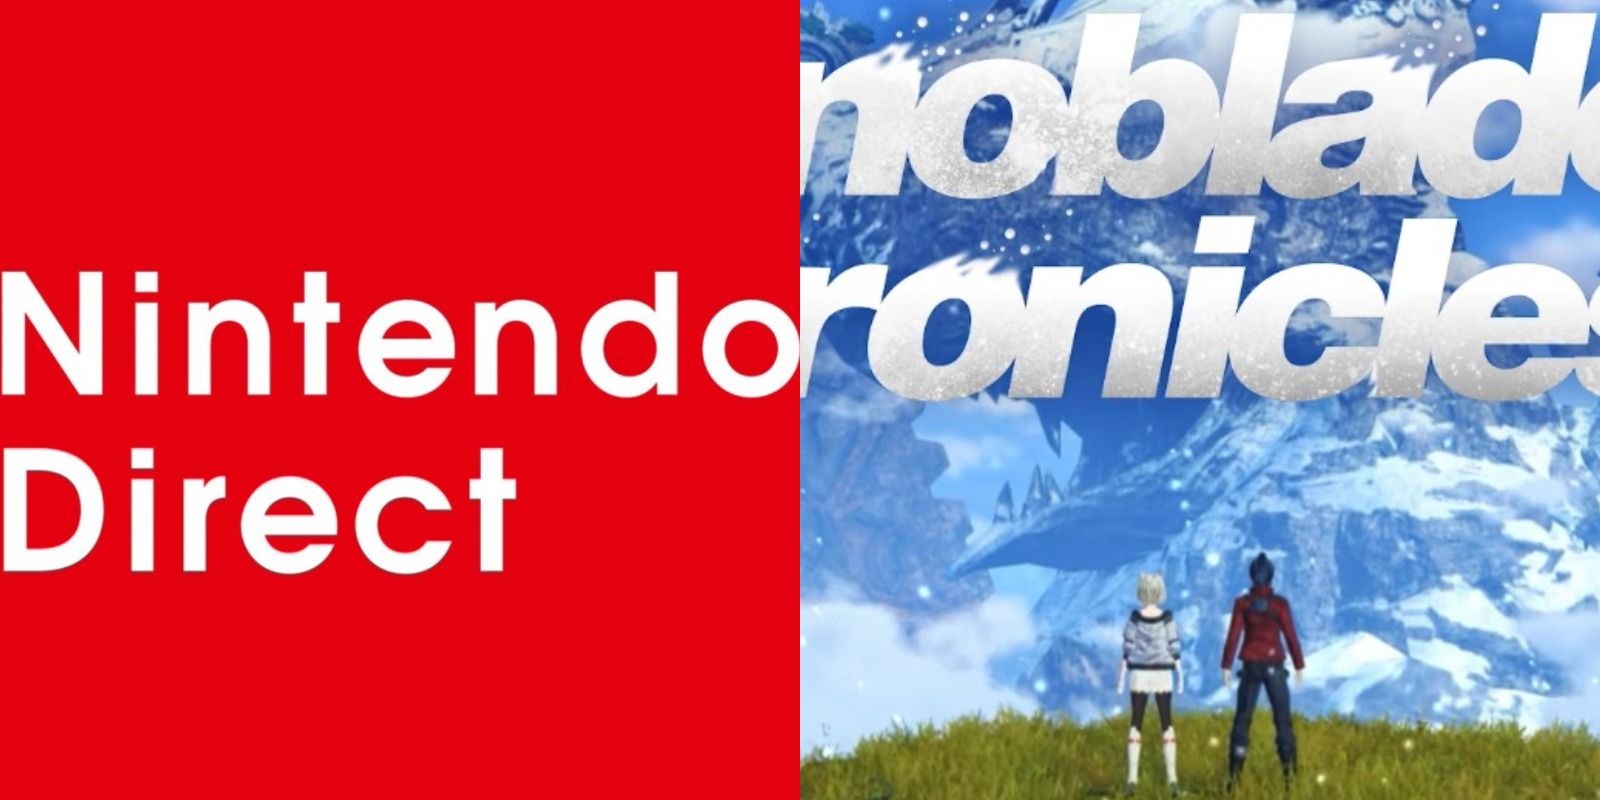 Split image of a Nintendo Direct logo and the cover of Xenoblade Chronicles 3